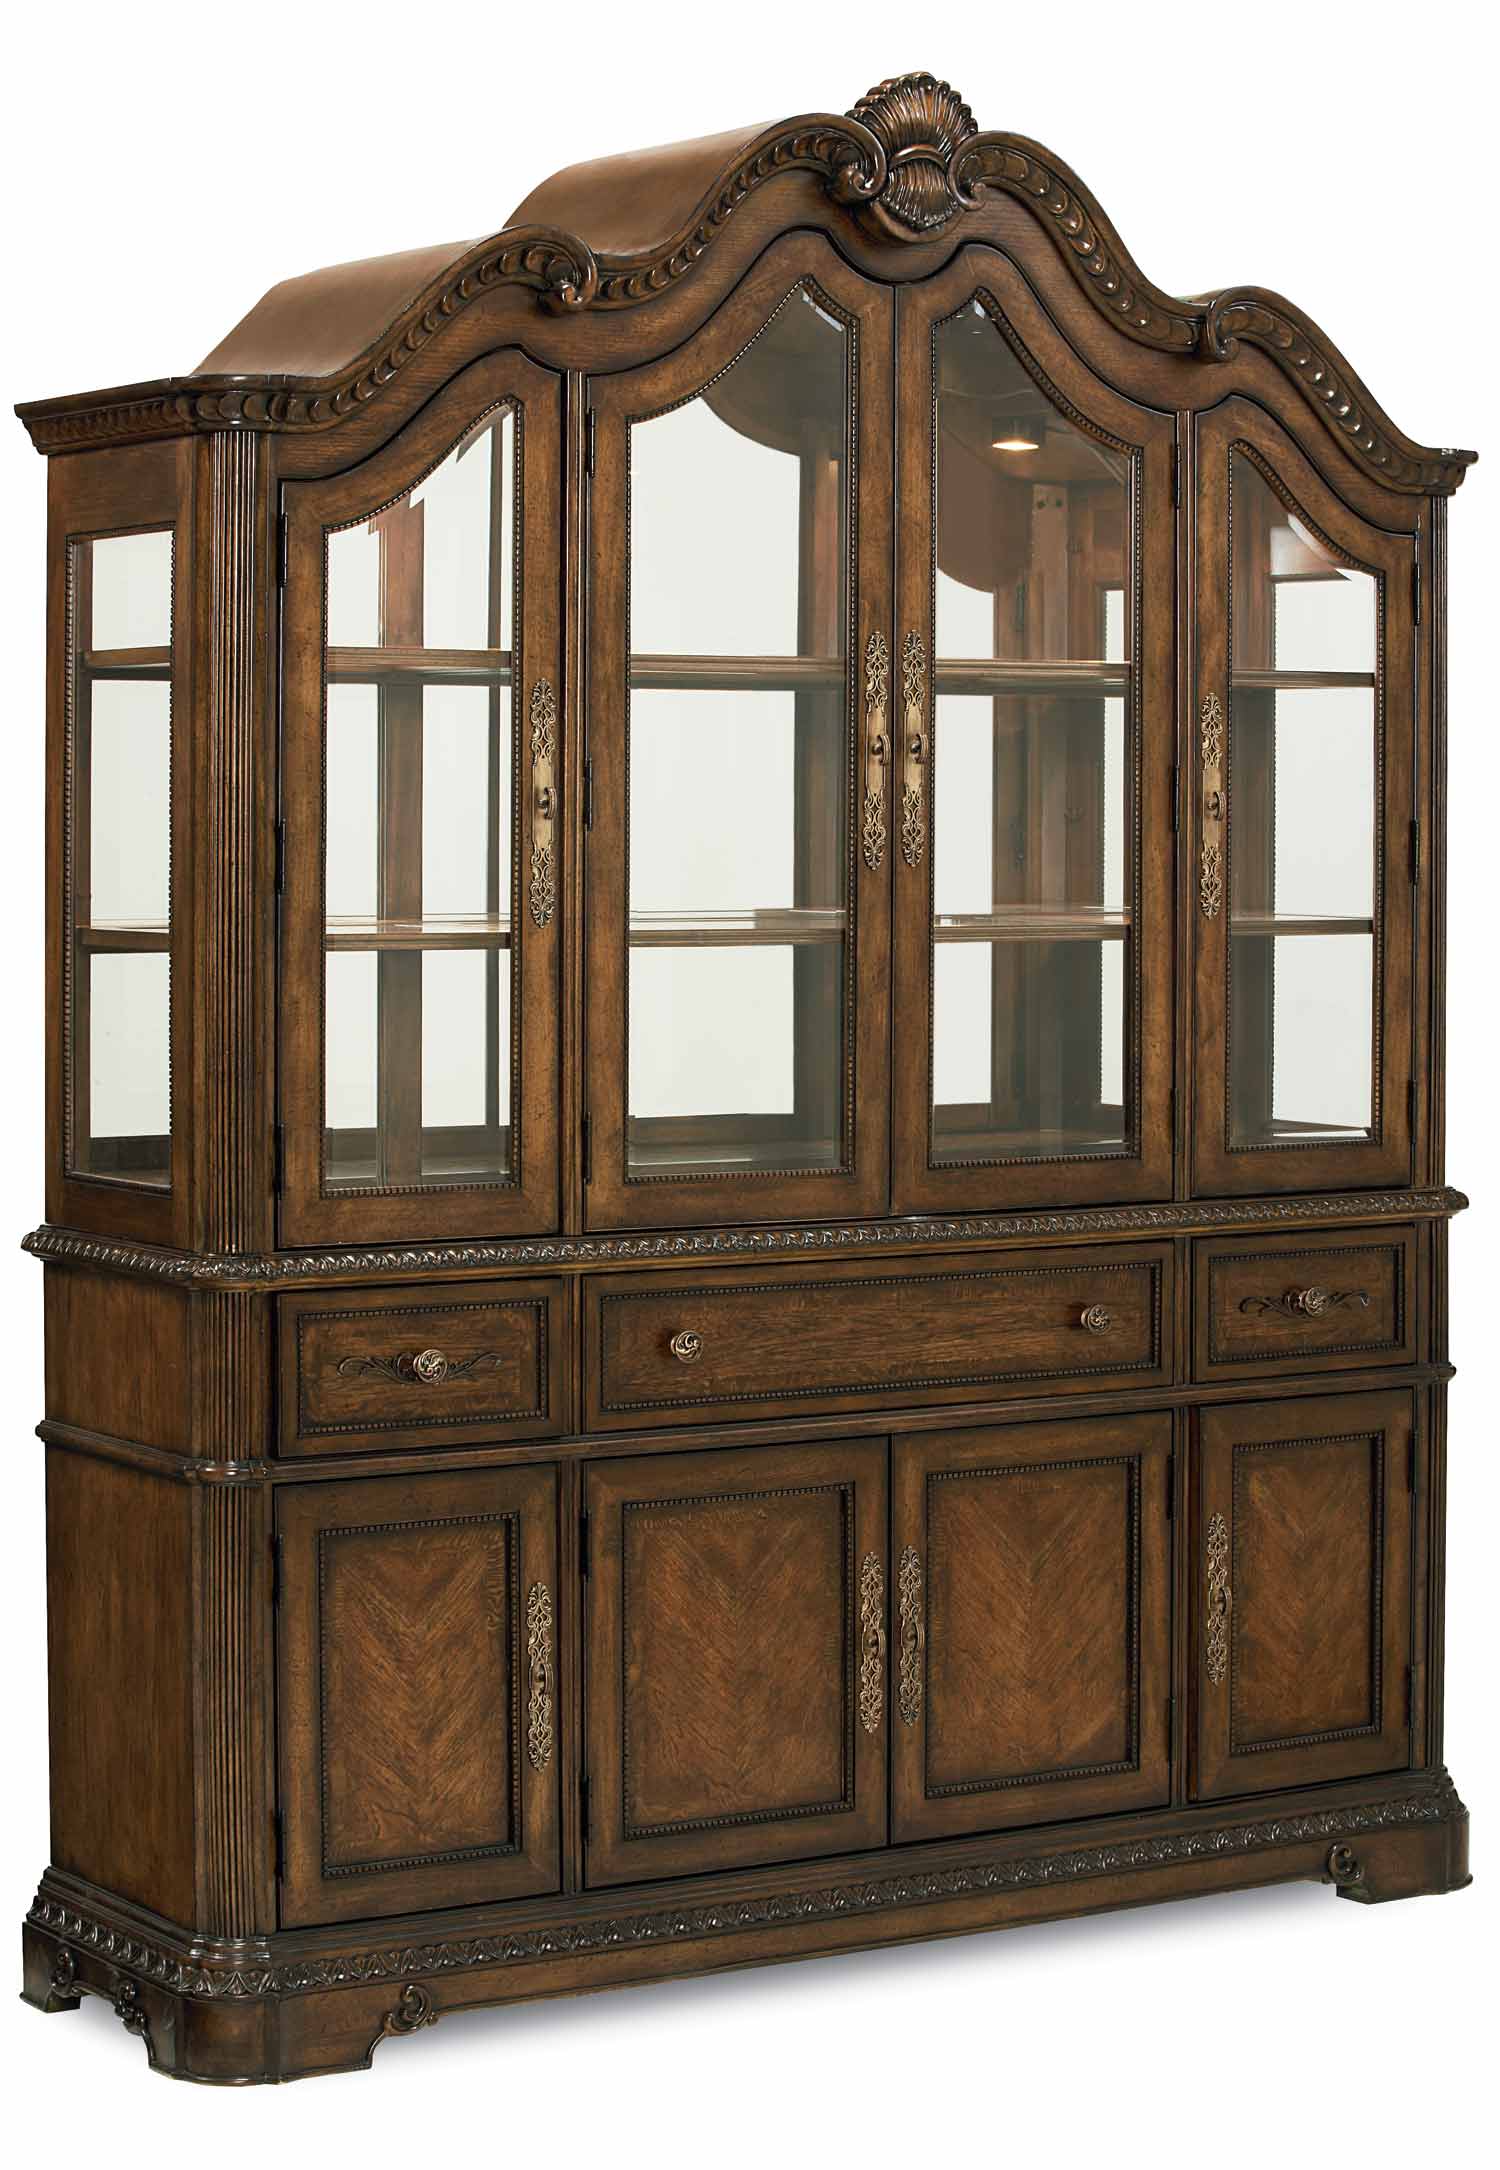 Legacy Classic Pemberleigh Buffet and Hutch - Brandy/Burnished Edges